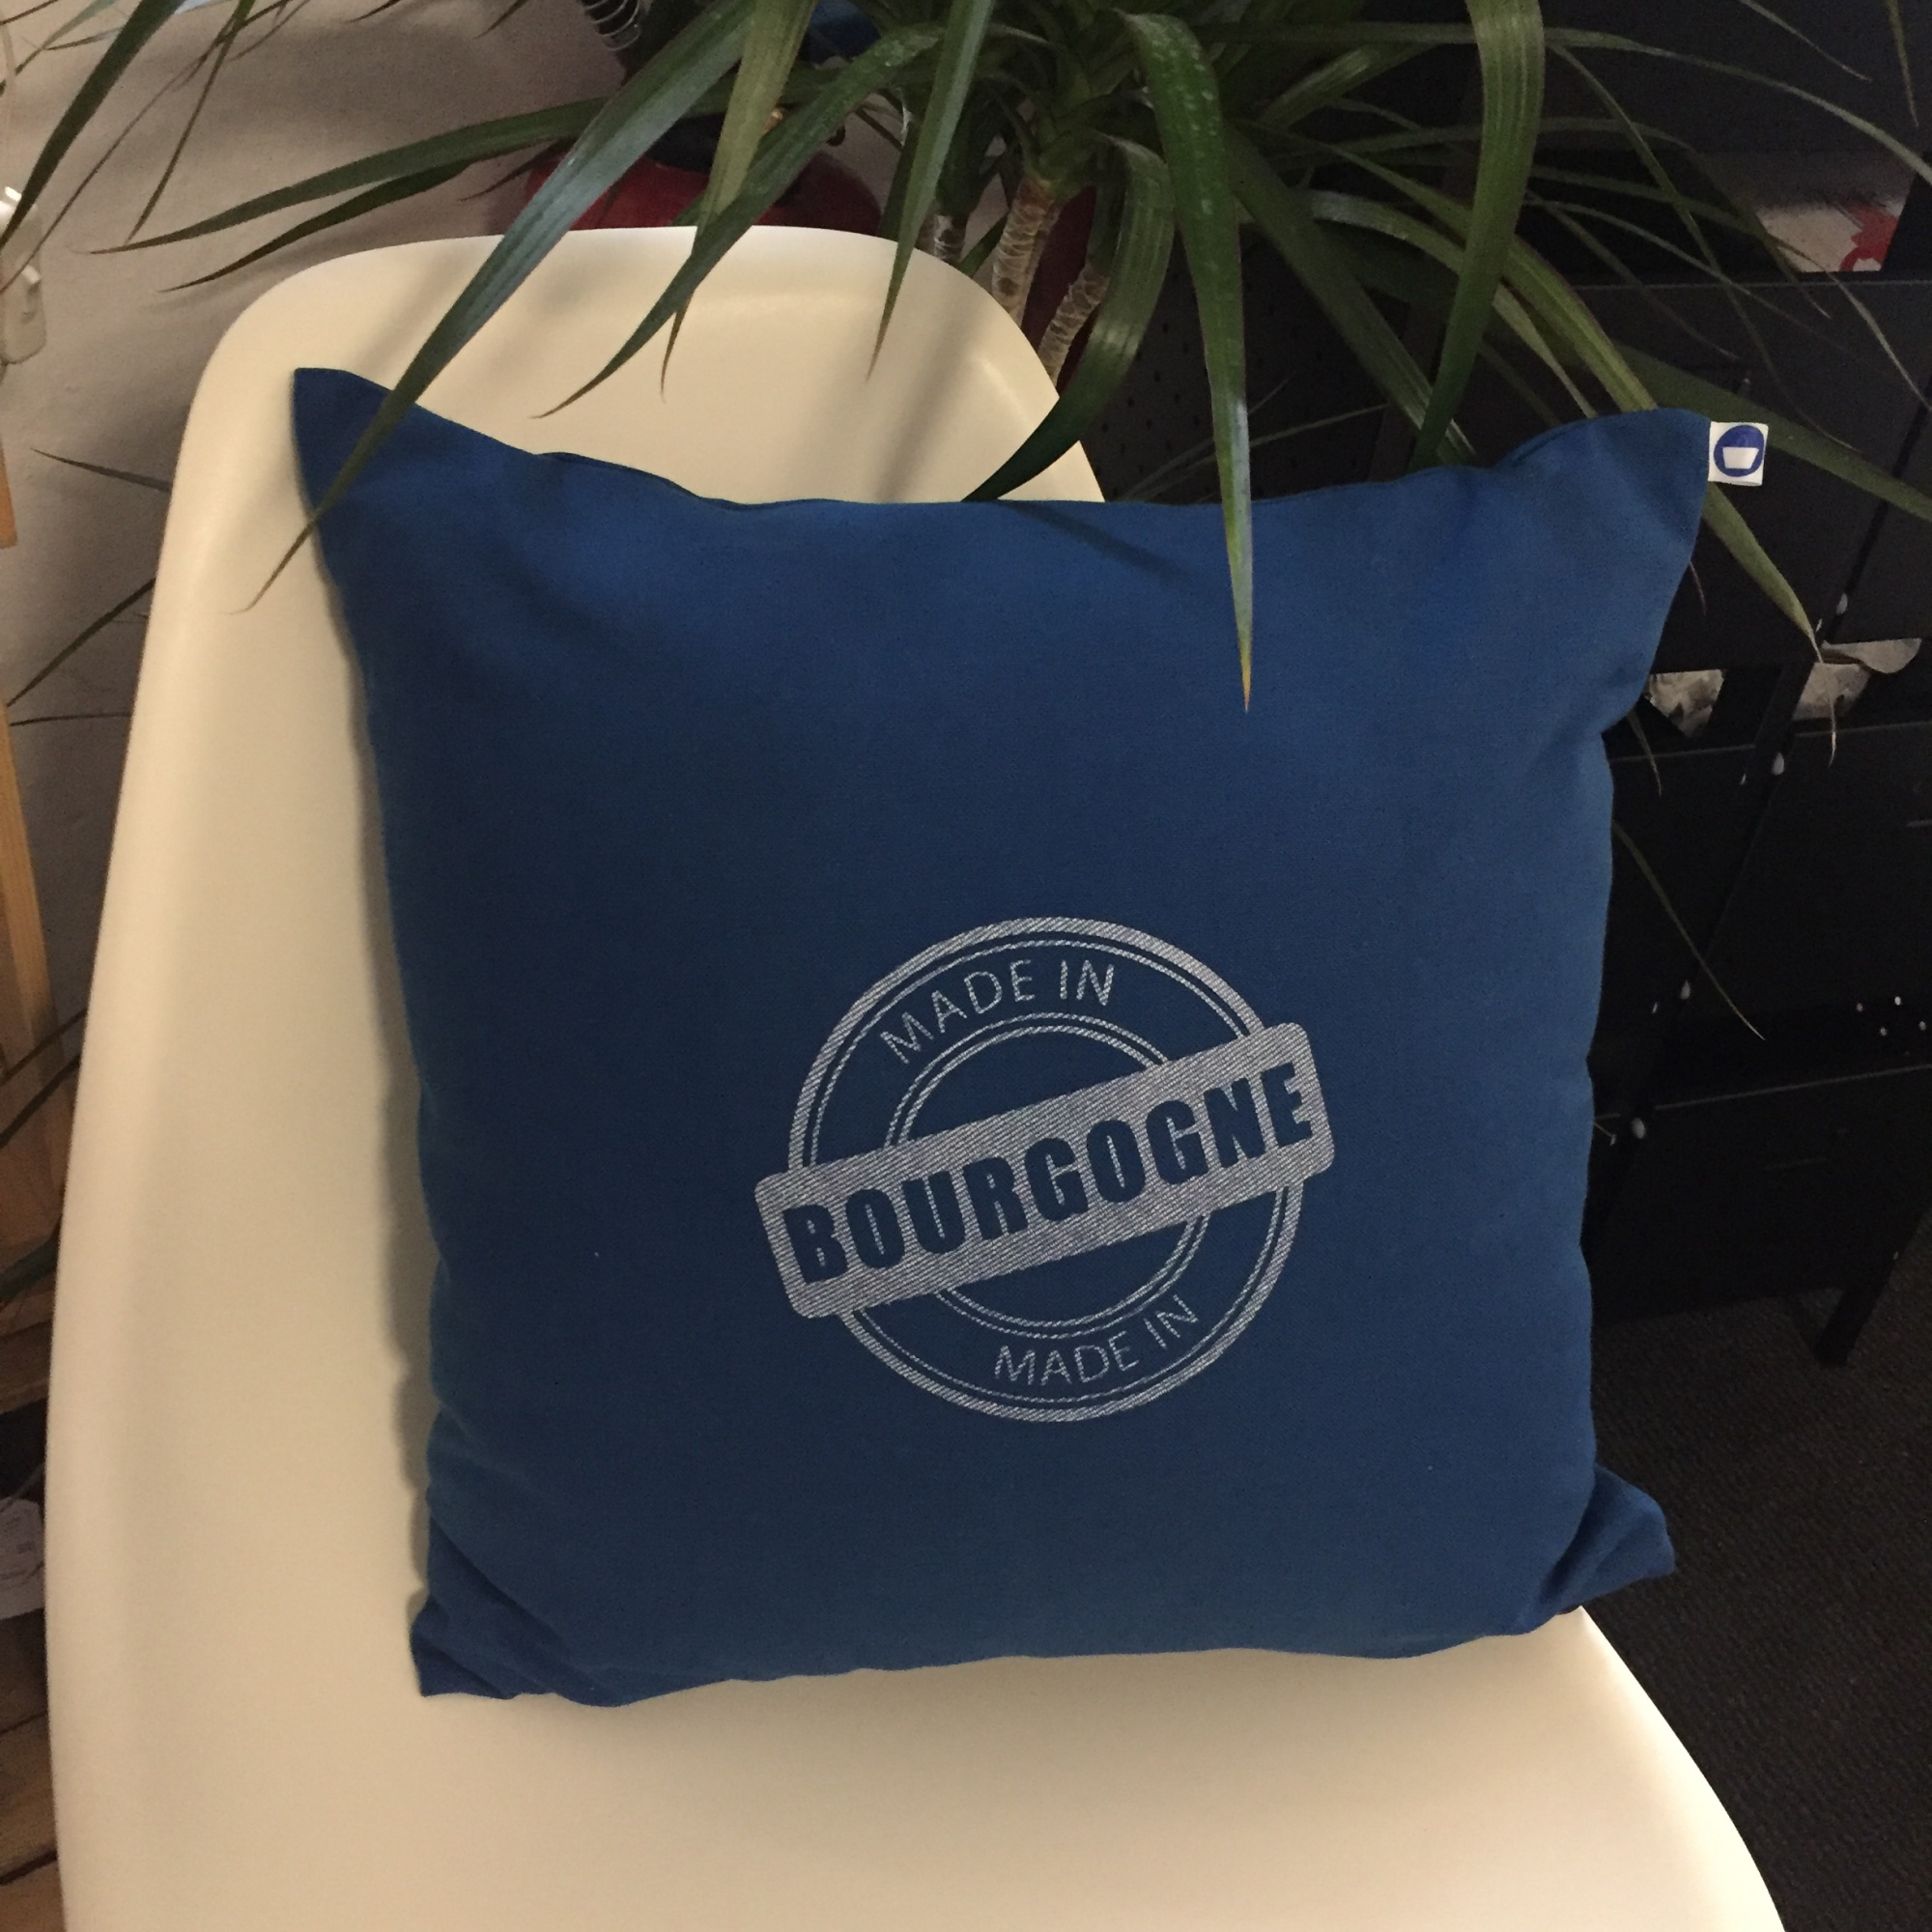 COUSSIN "MADE IN BOURGOGNE"